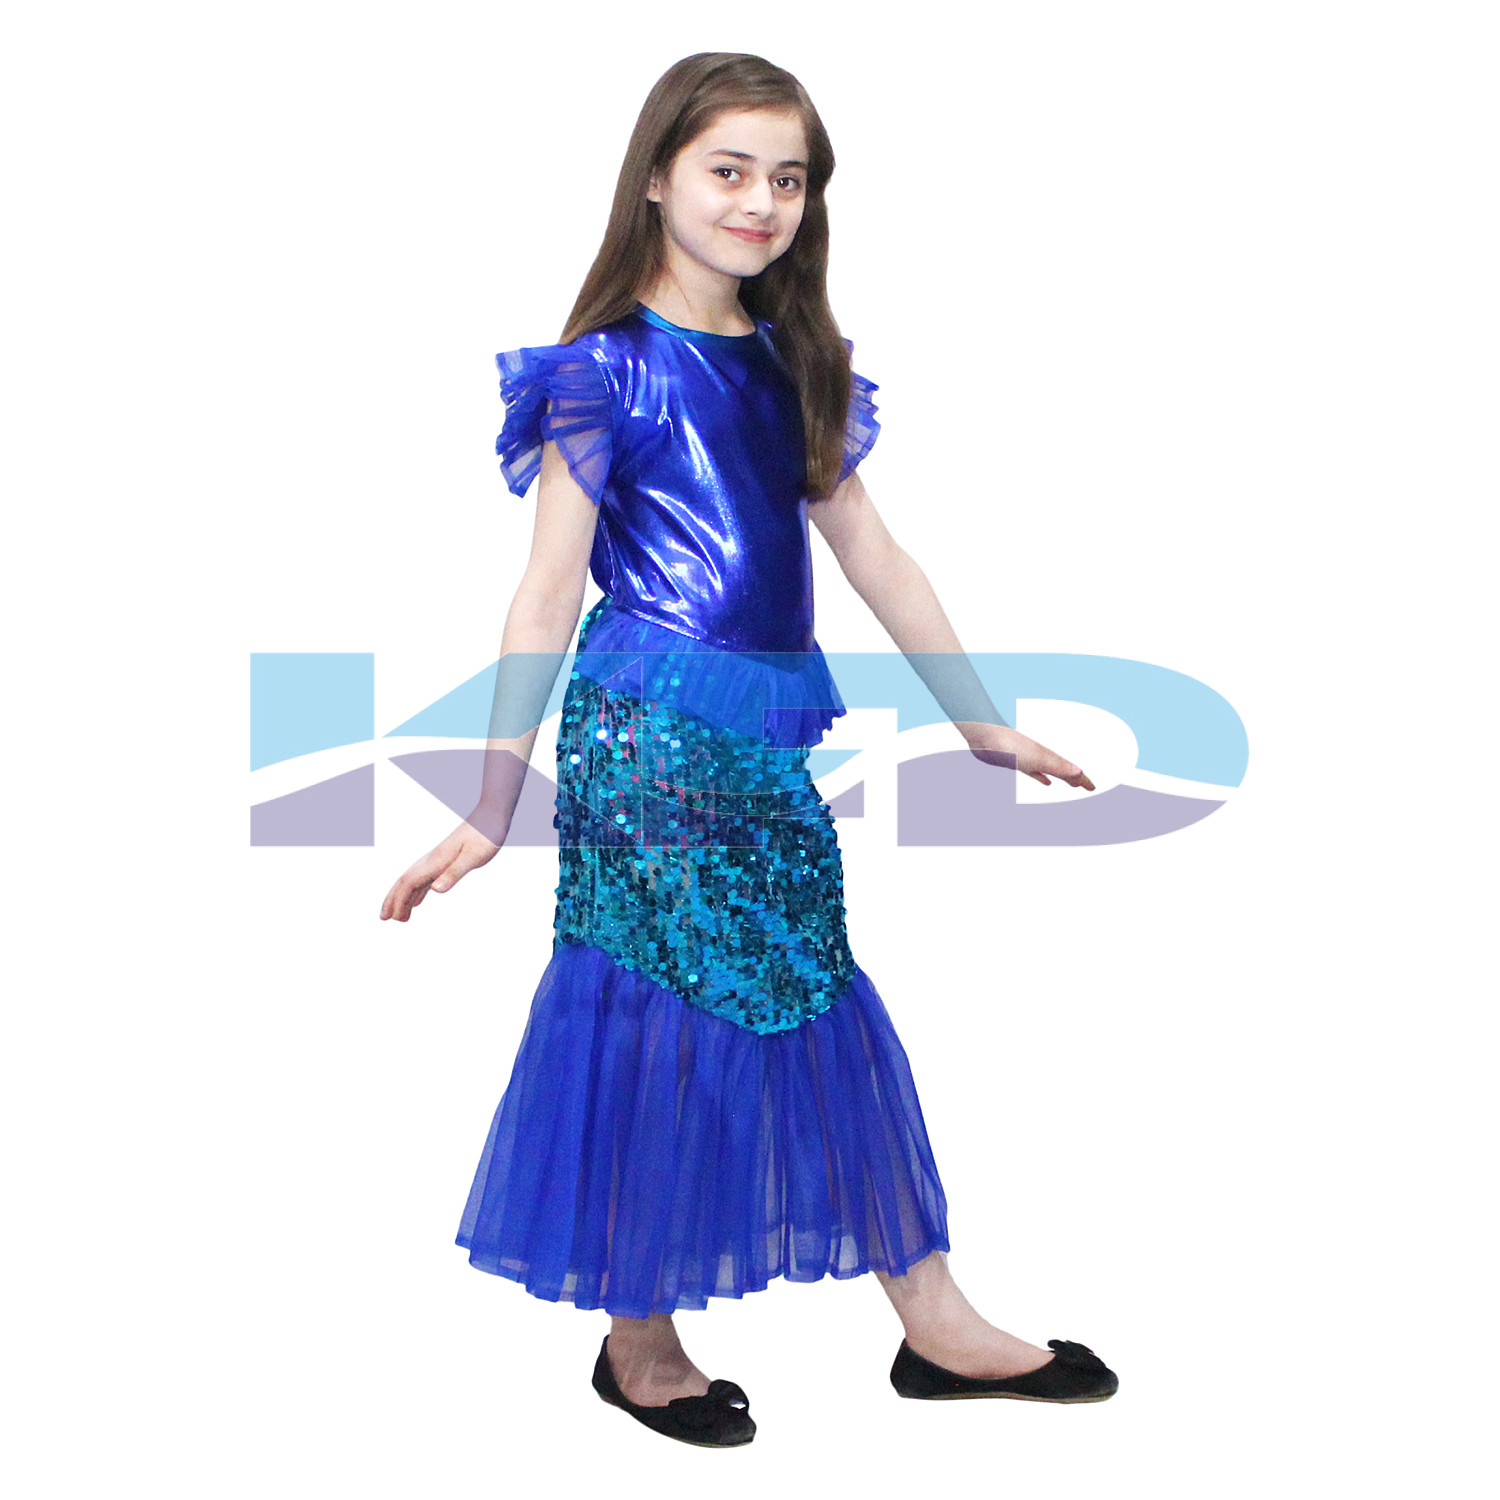 Mermaid Fancy Dress for kids,Fairy Teles,Story book Costume for Annual function/Theme Party/competition/Stage Shows/Birthday Party Dress